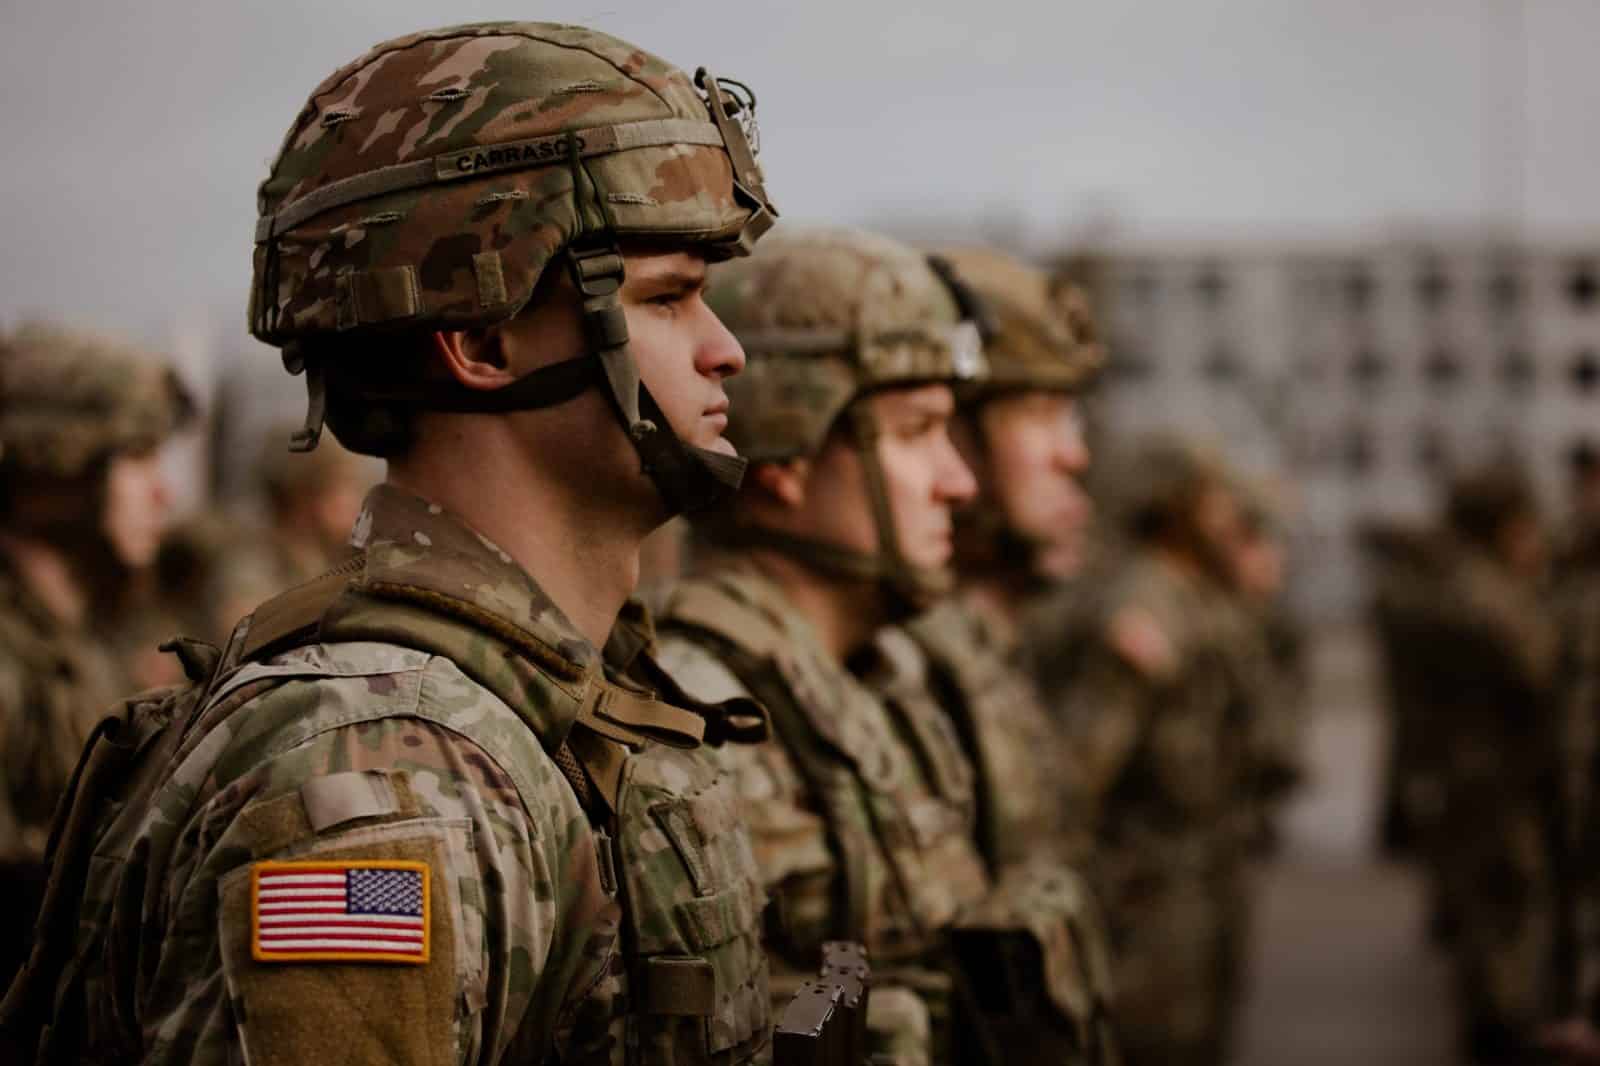 The USA to keep 100,000 troops in Europe